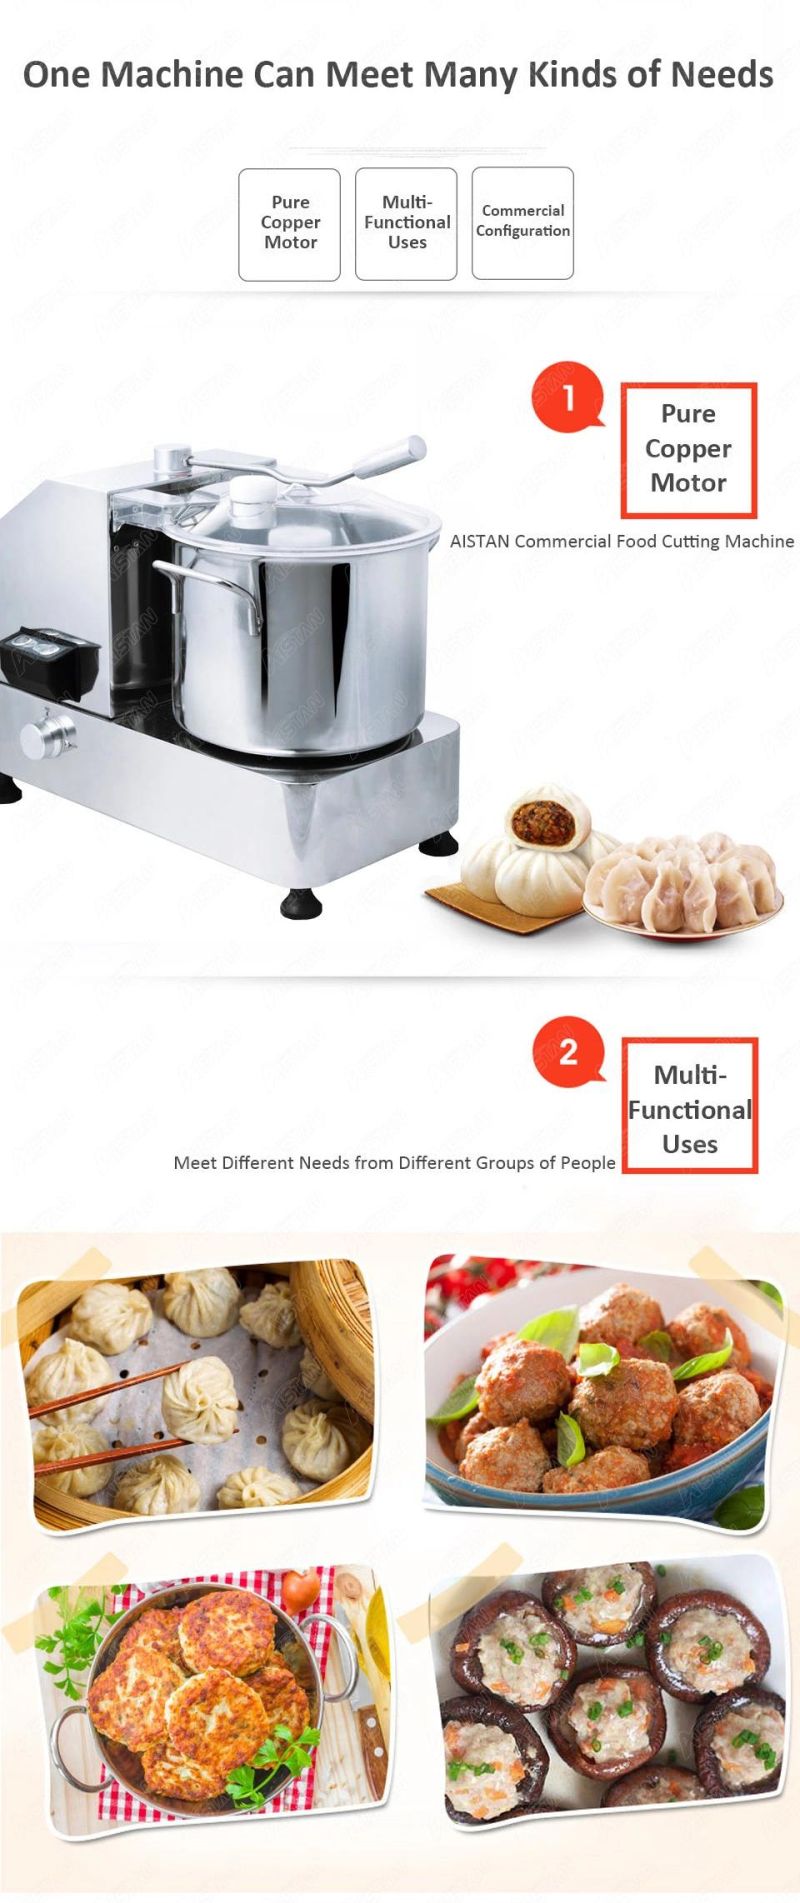 Hr9 Electric Stainless Steel Professional Food Cutter Machine Leafy Industrial Vegetable Slicer Cutter Multifunction